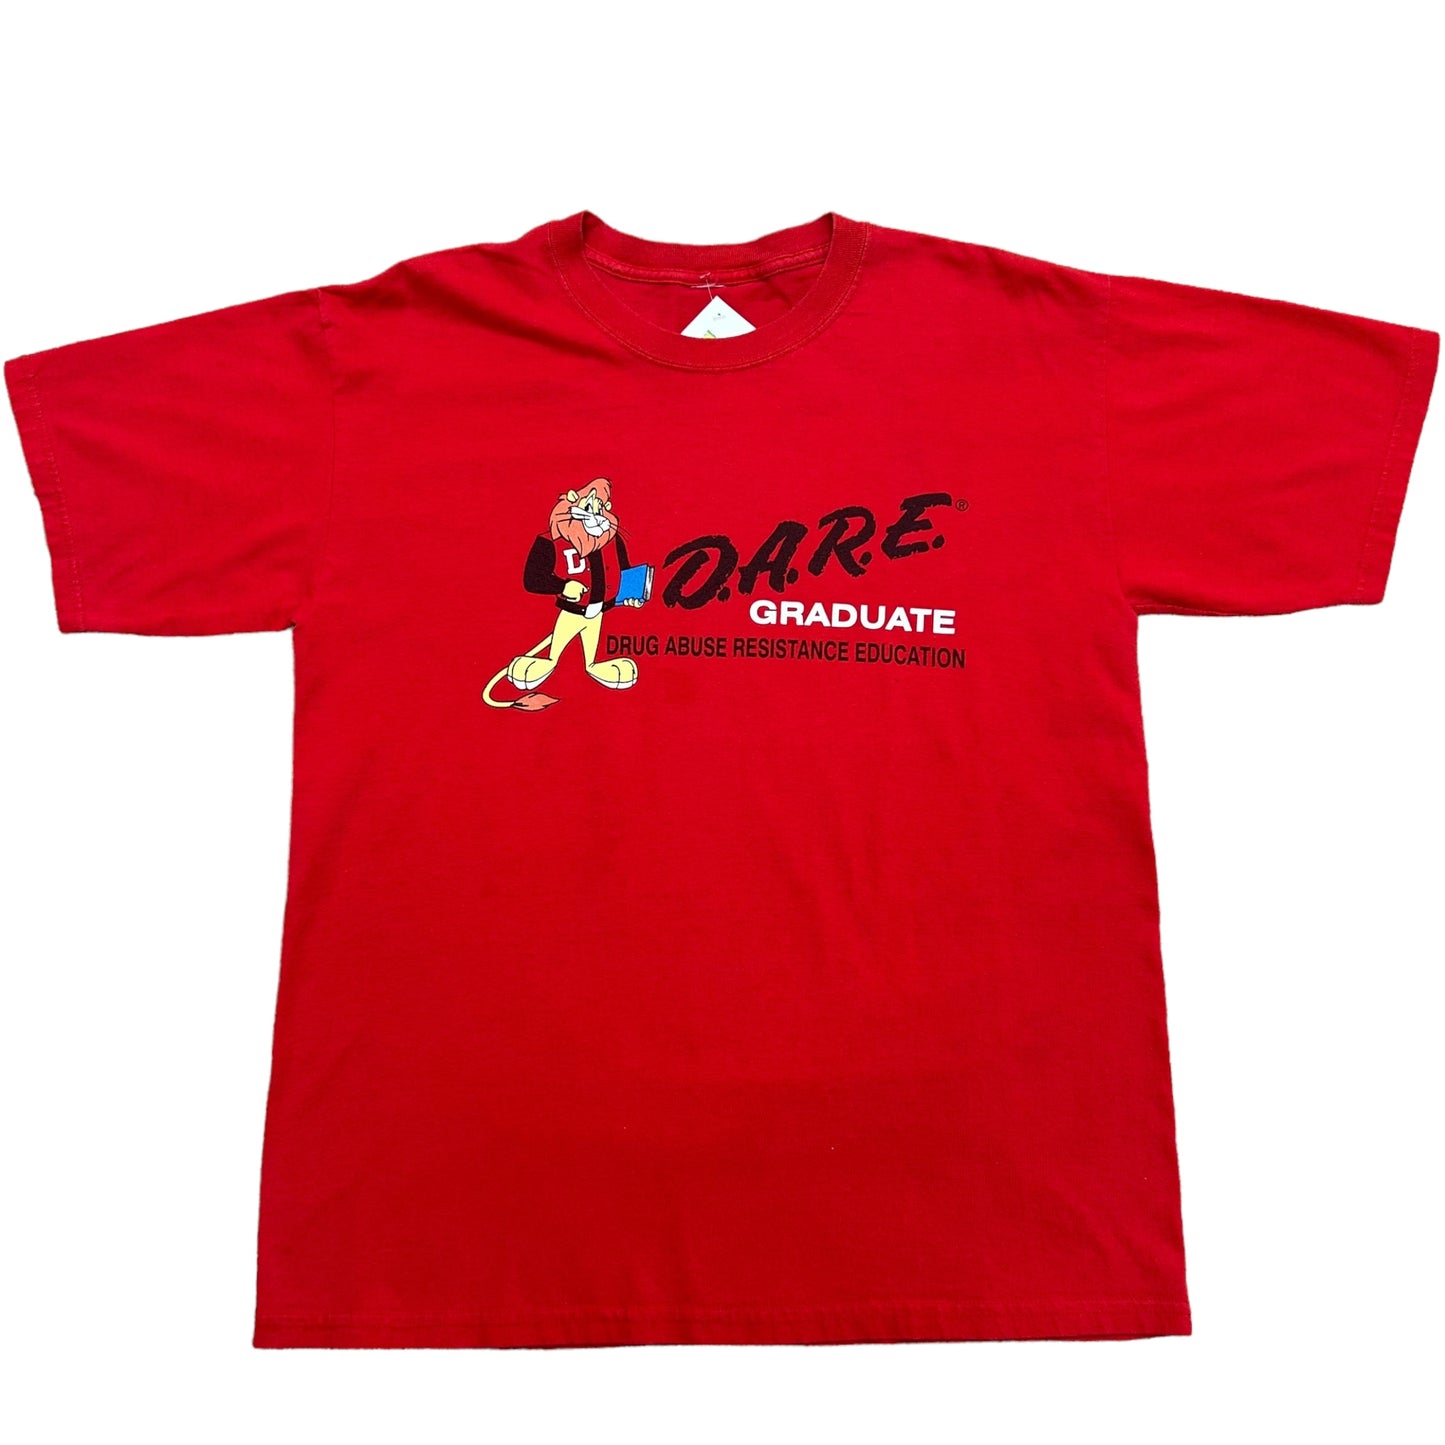 Vintage 1990s DARE Graduate Red Graphic T-Shirt - Size Large